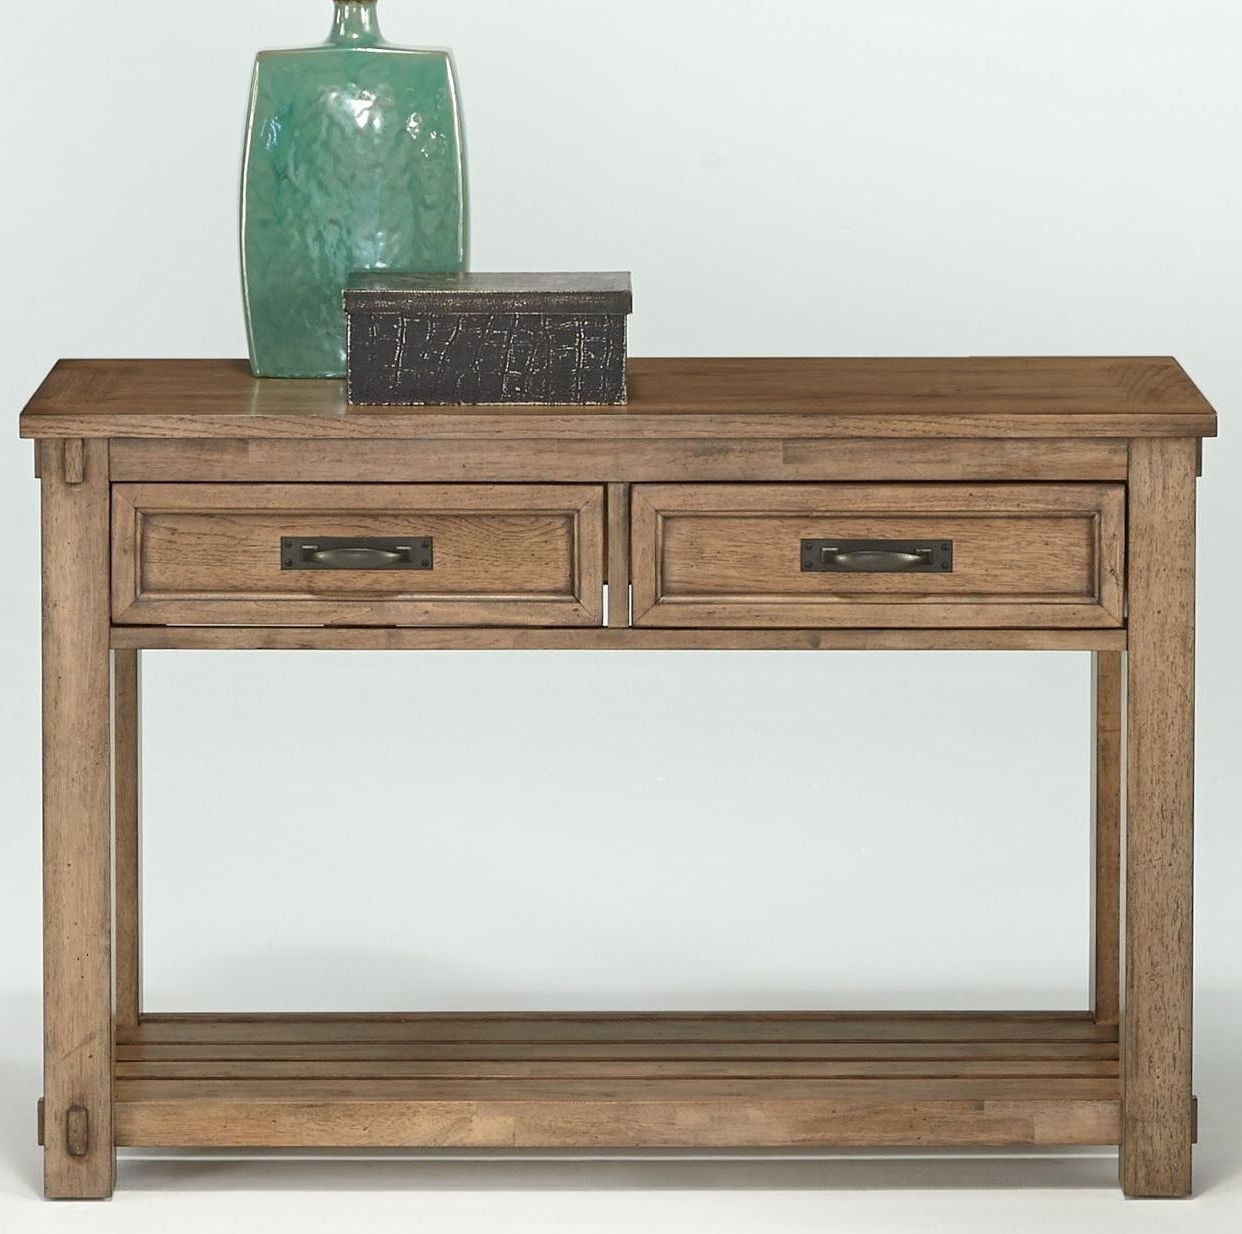 Warm Pecan Console Tables For Current Boulder Creek Antique Pecan Sofa/console Table From (View 7 of 10)